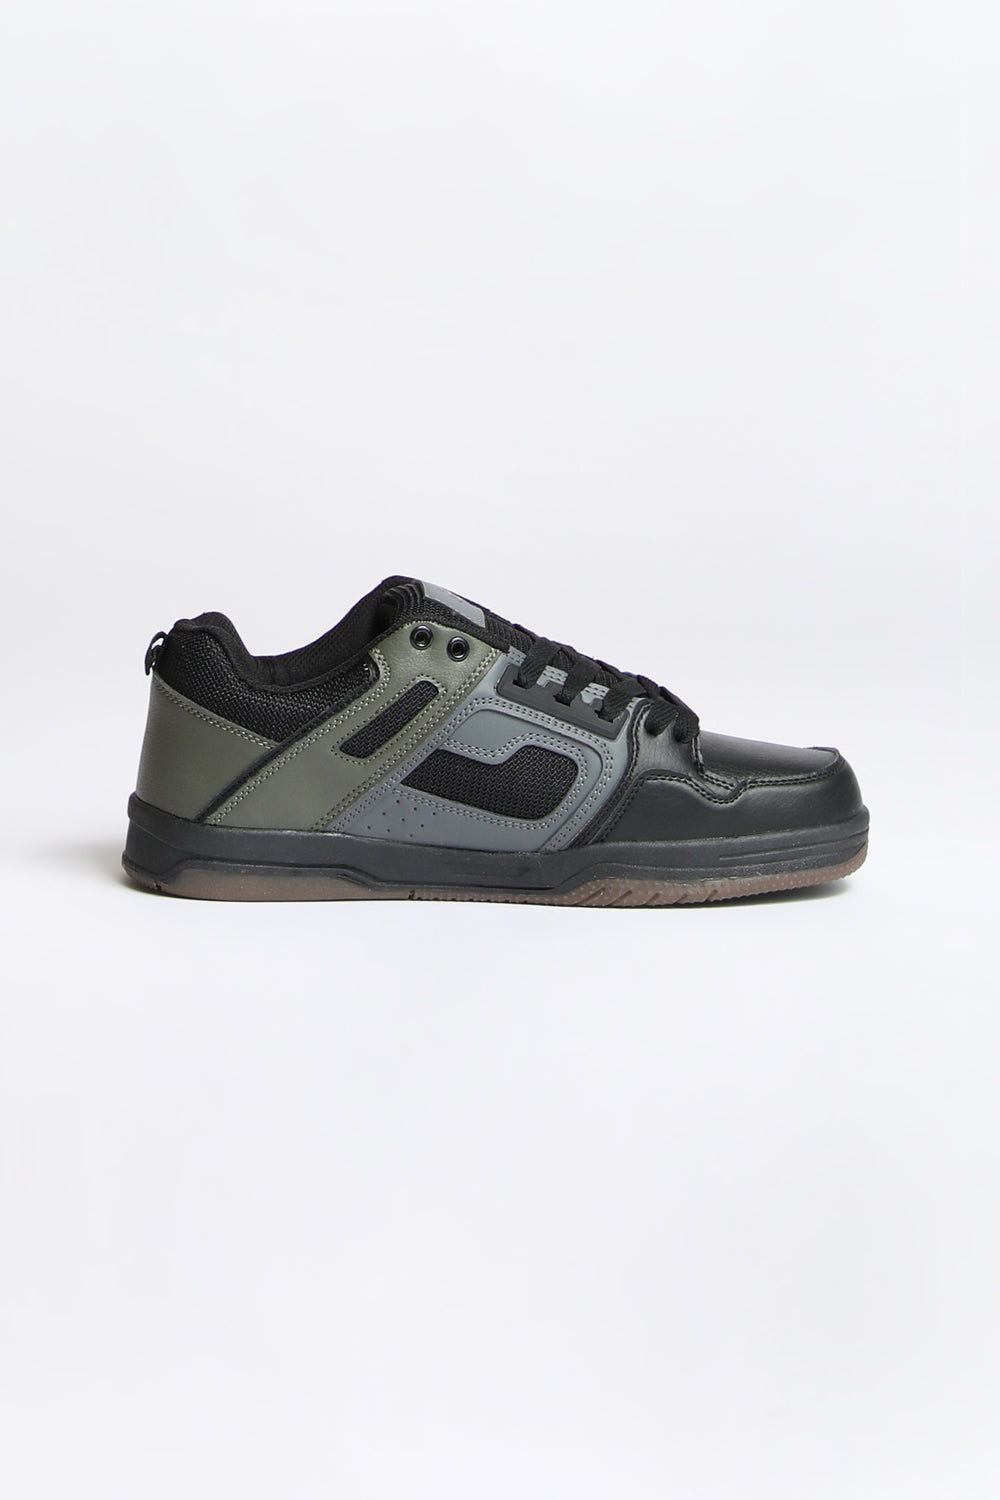 Zoo York Youth Carter Shoes Black